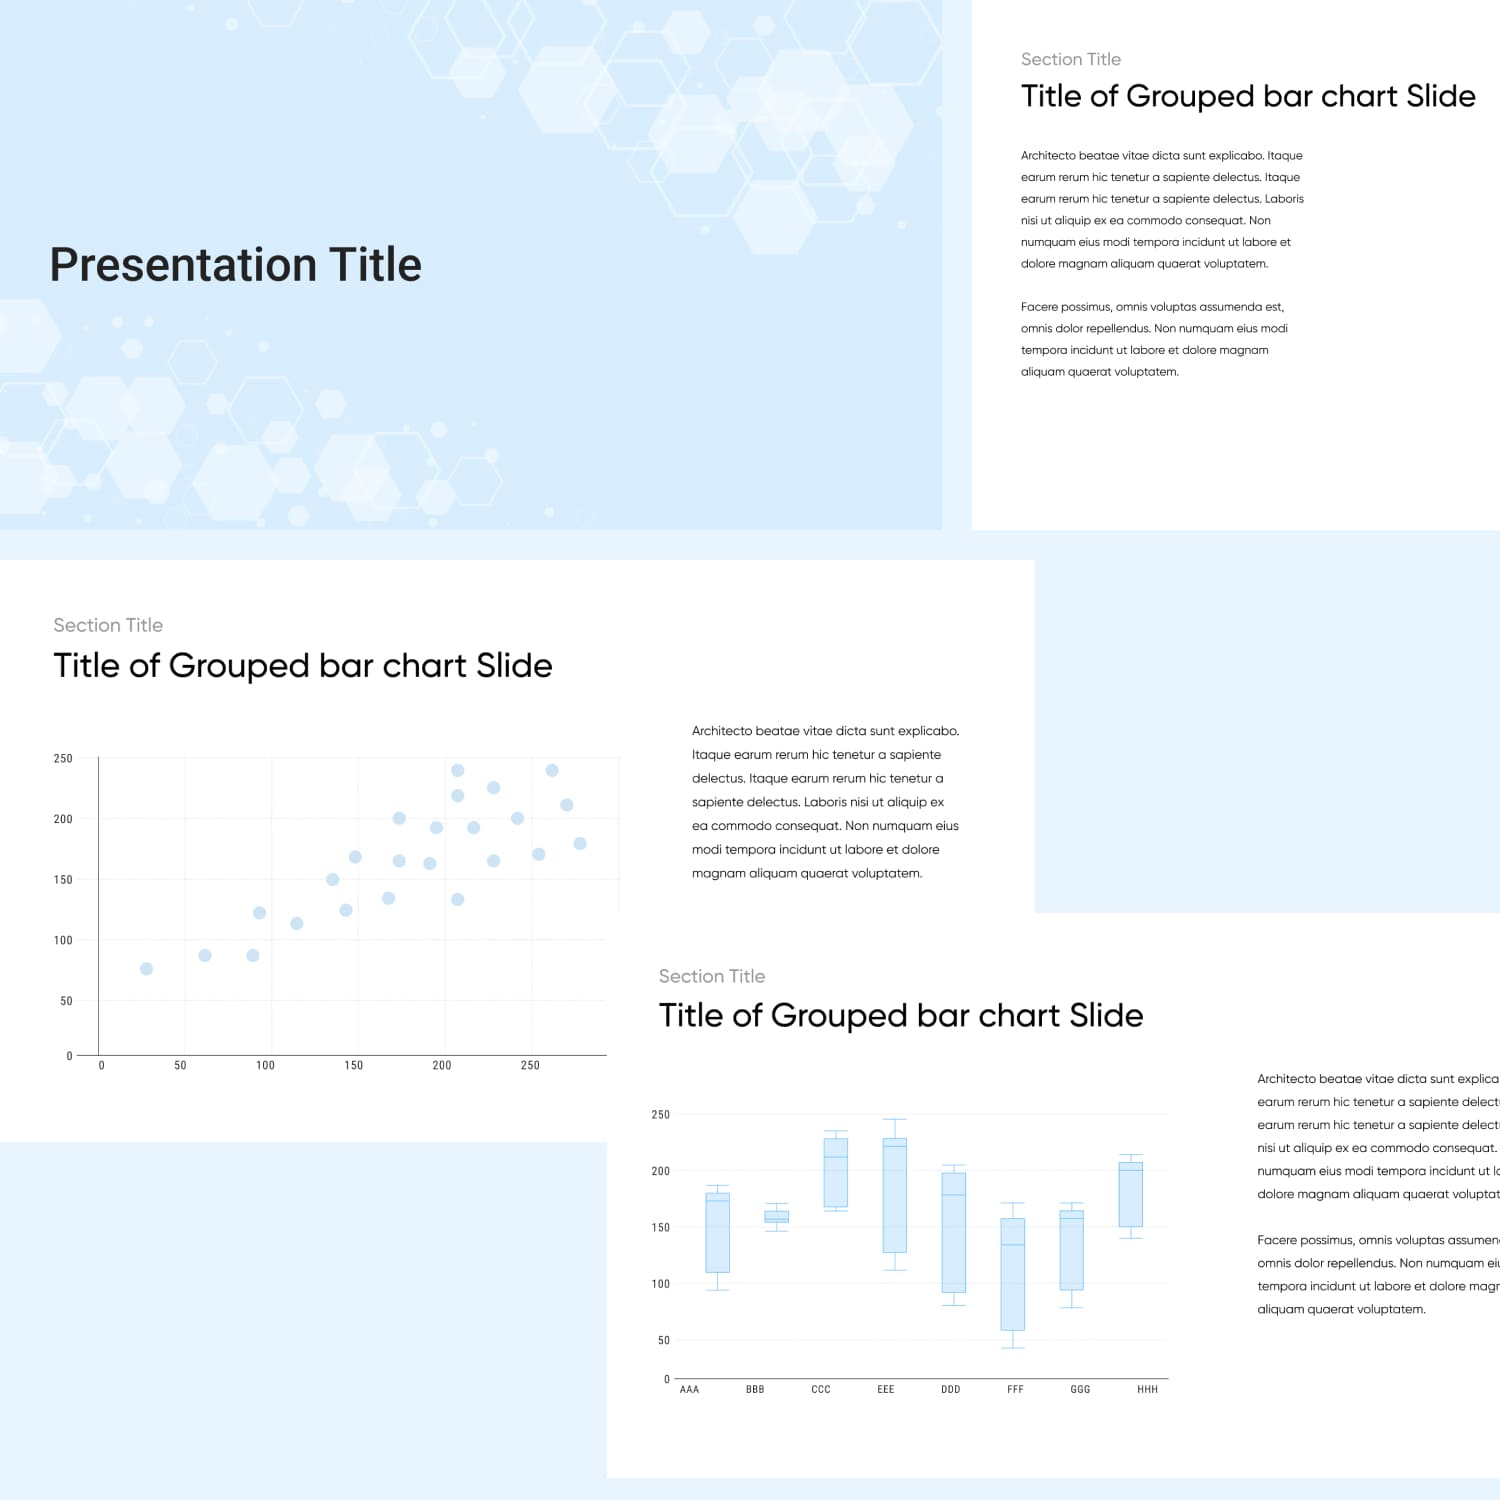 Image with powerpoint timeline template.